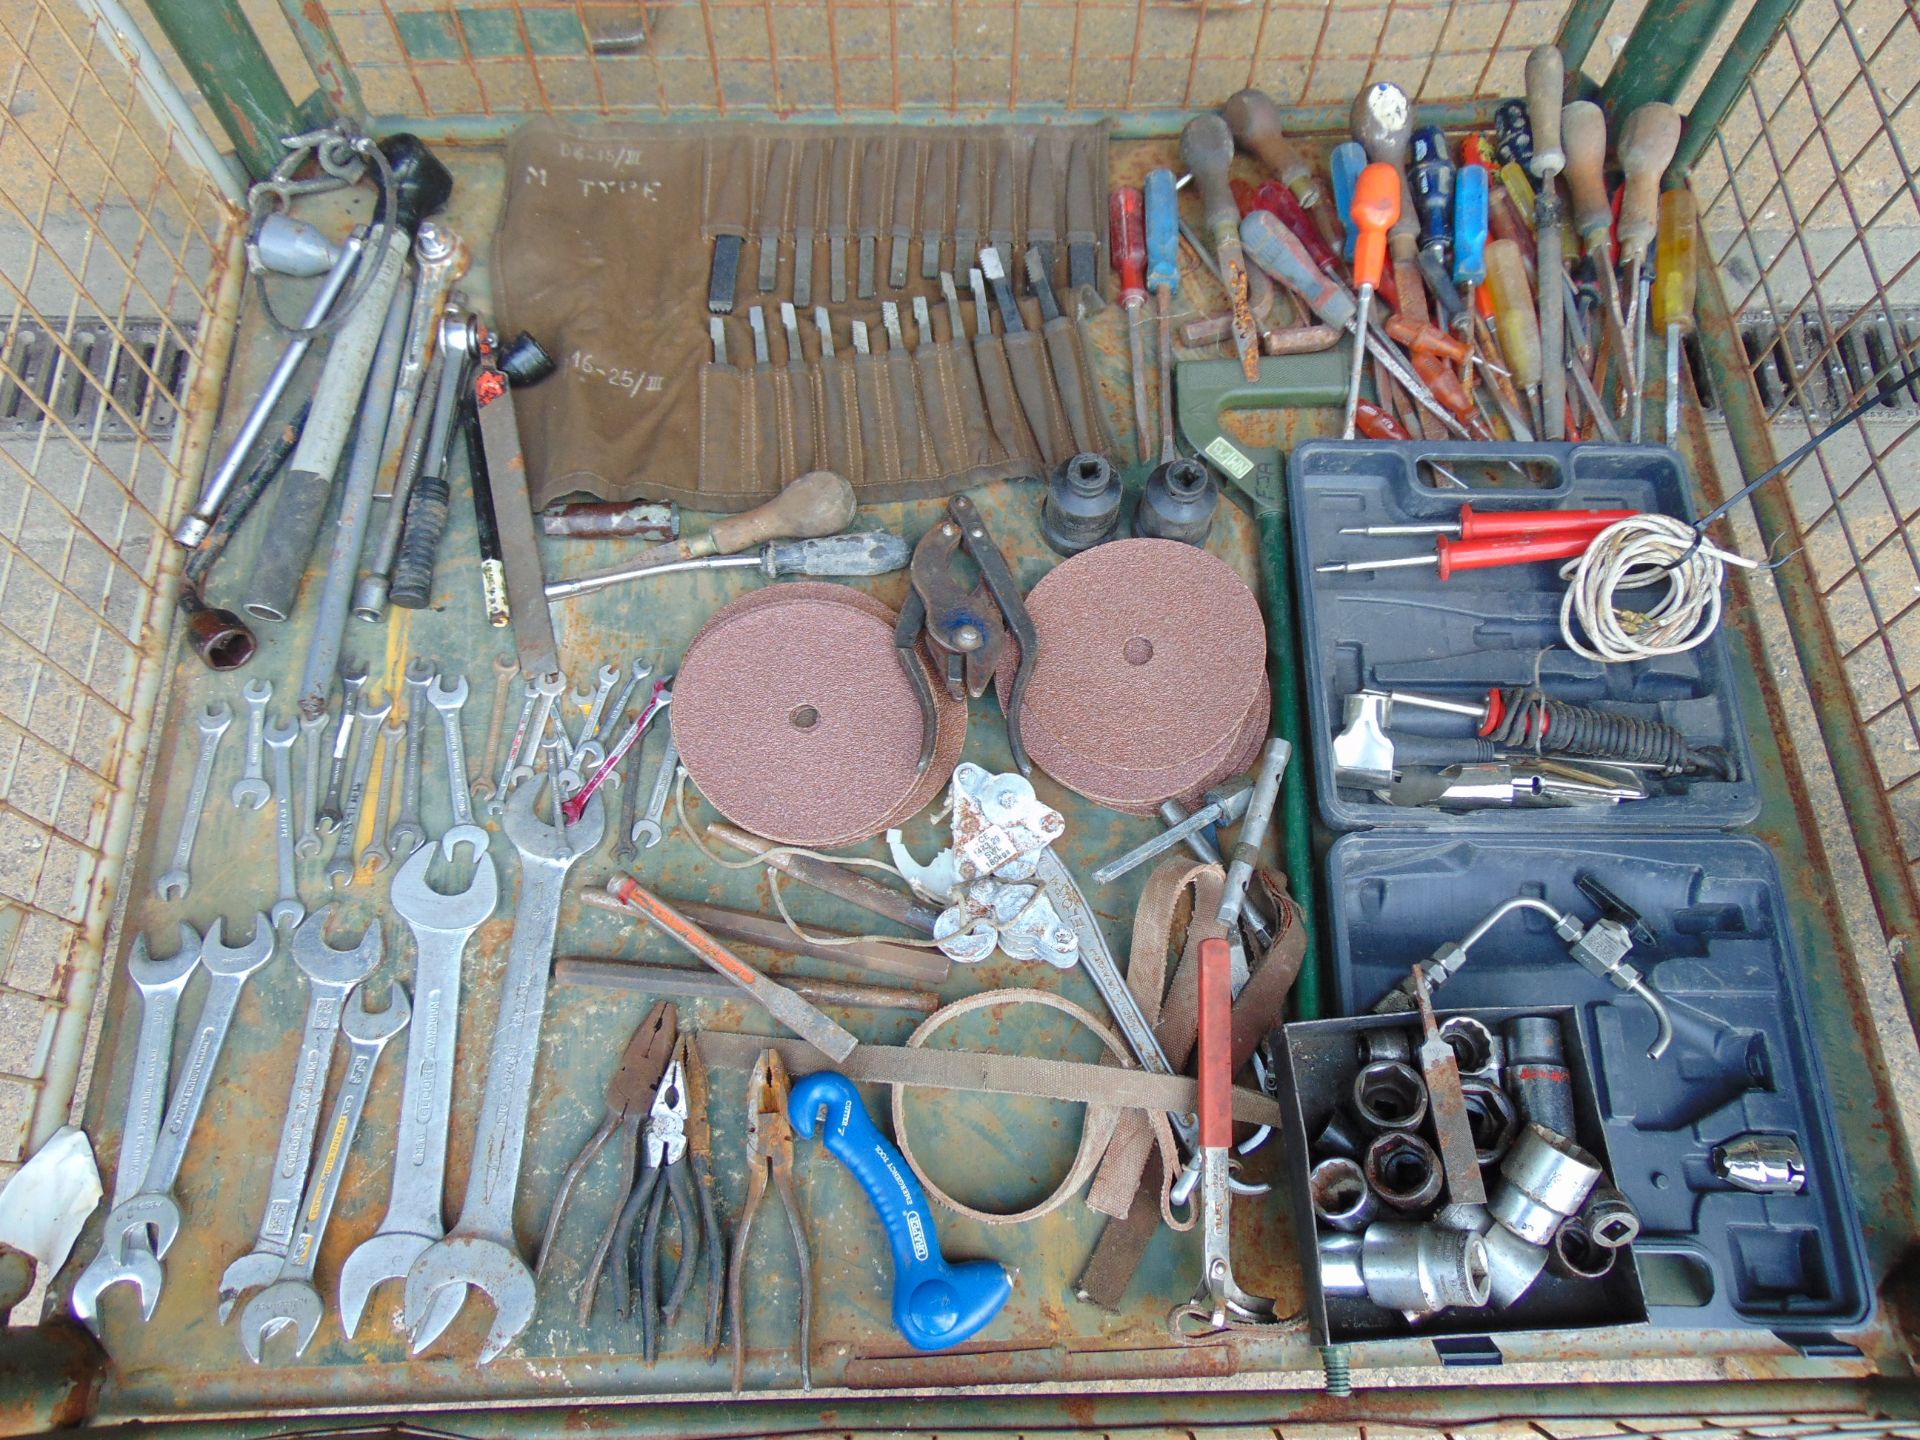 1 x Stillage of Workshop Tools, Spanners, Sockets, Lathe Tools, etc, Approx 120 Items - Image 8 of 9